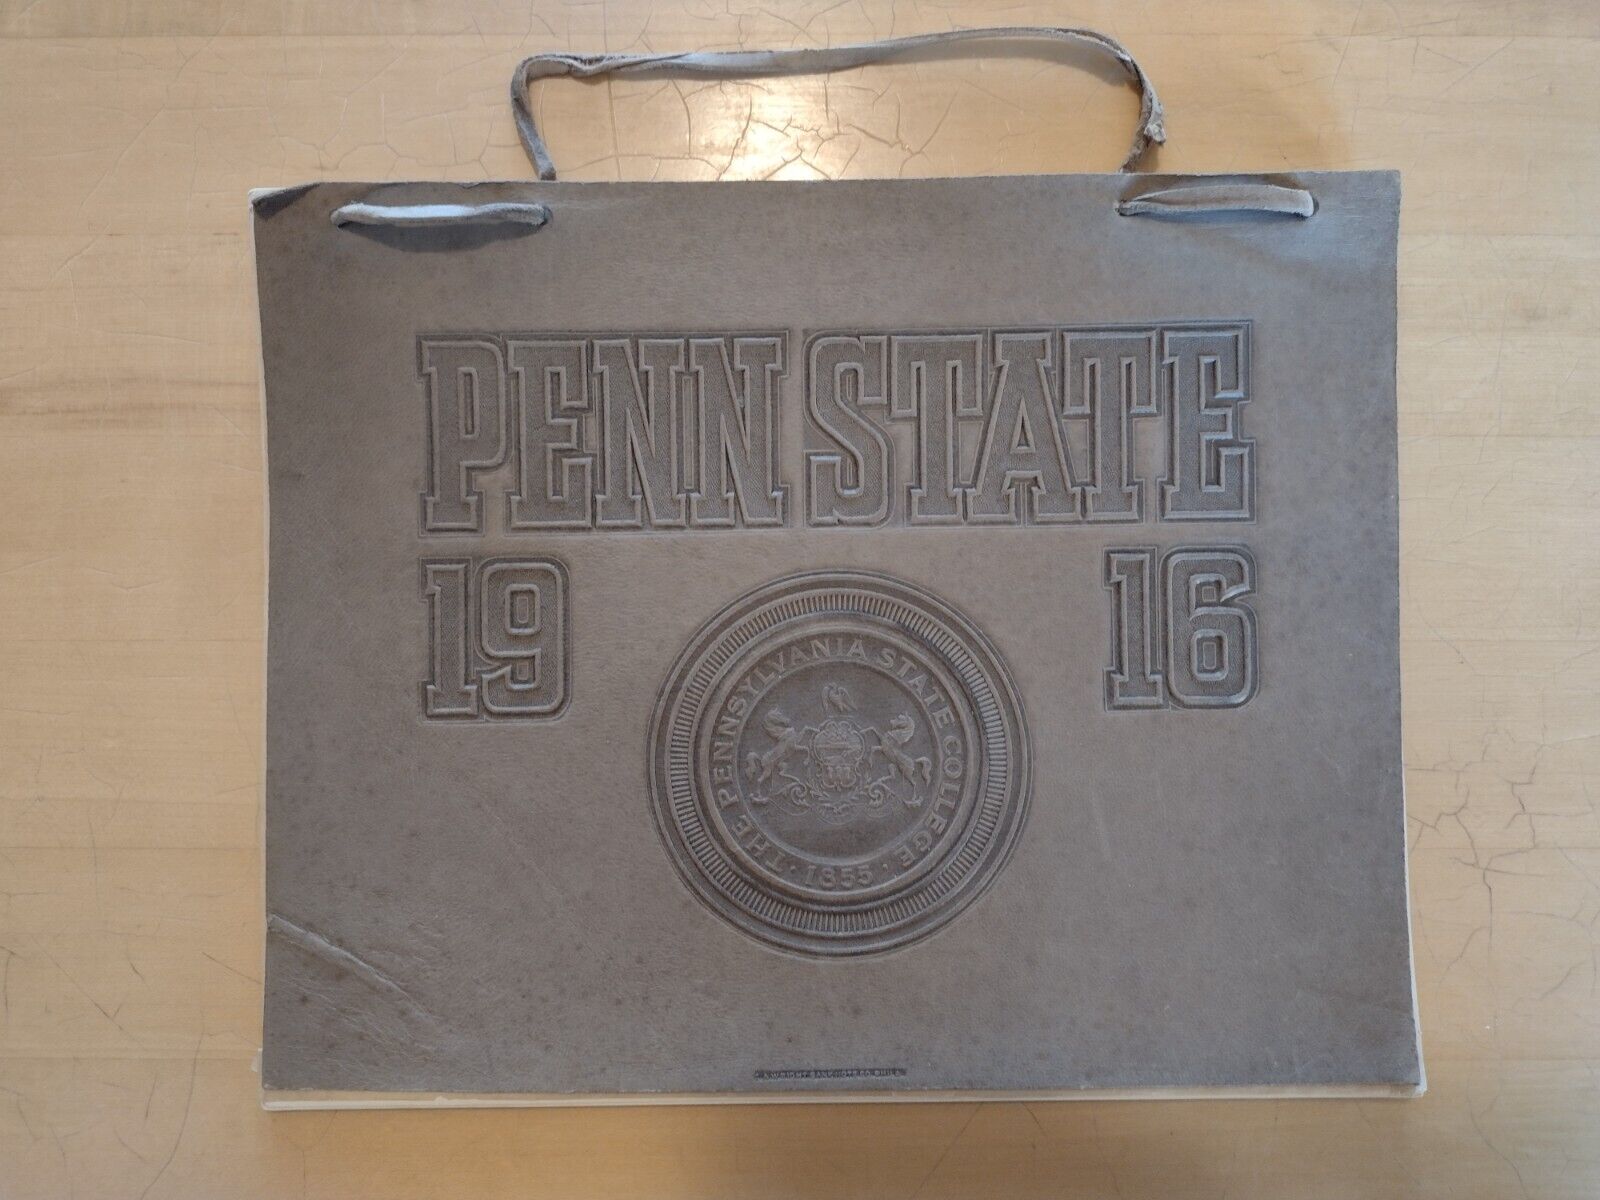 Antique 1916 PENN STATE Calendar w/ Sports Teams & Buildings - Embossed Cover